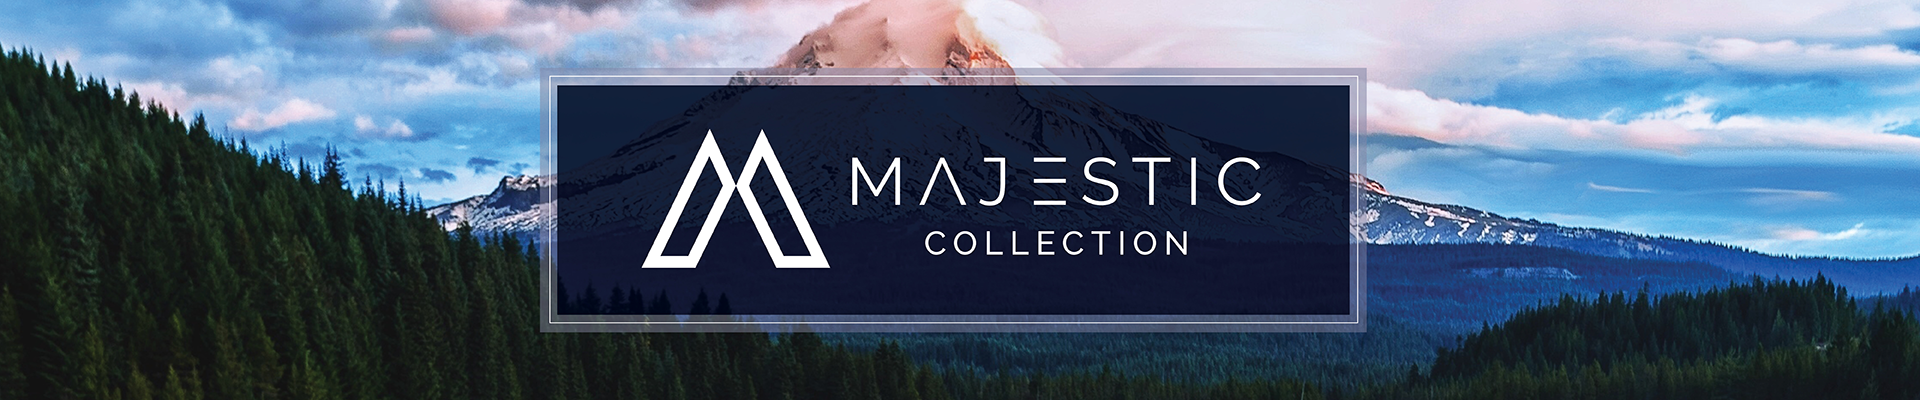 Majestic Collection By Clayton Hermiston